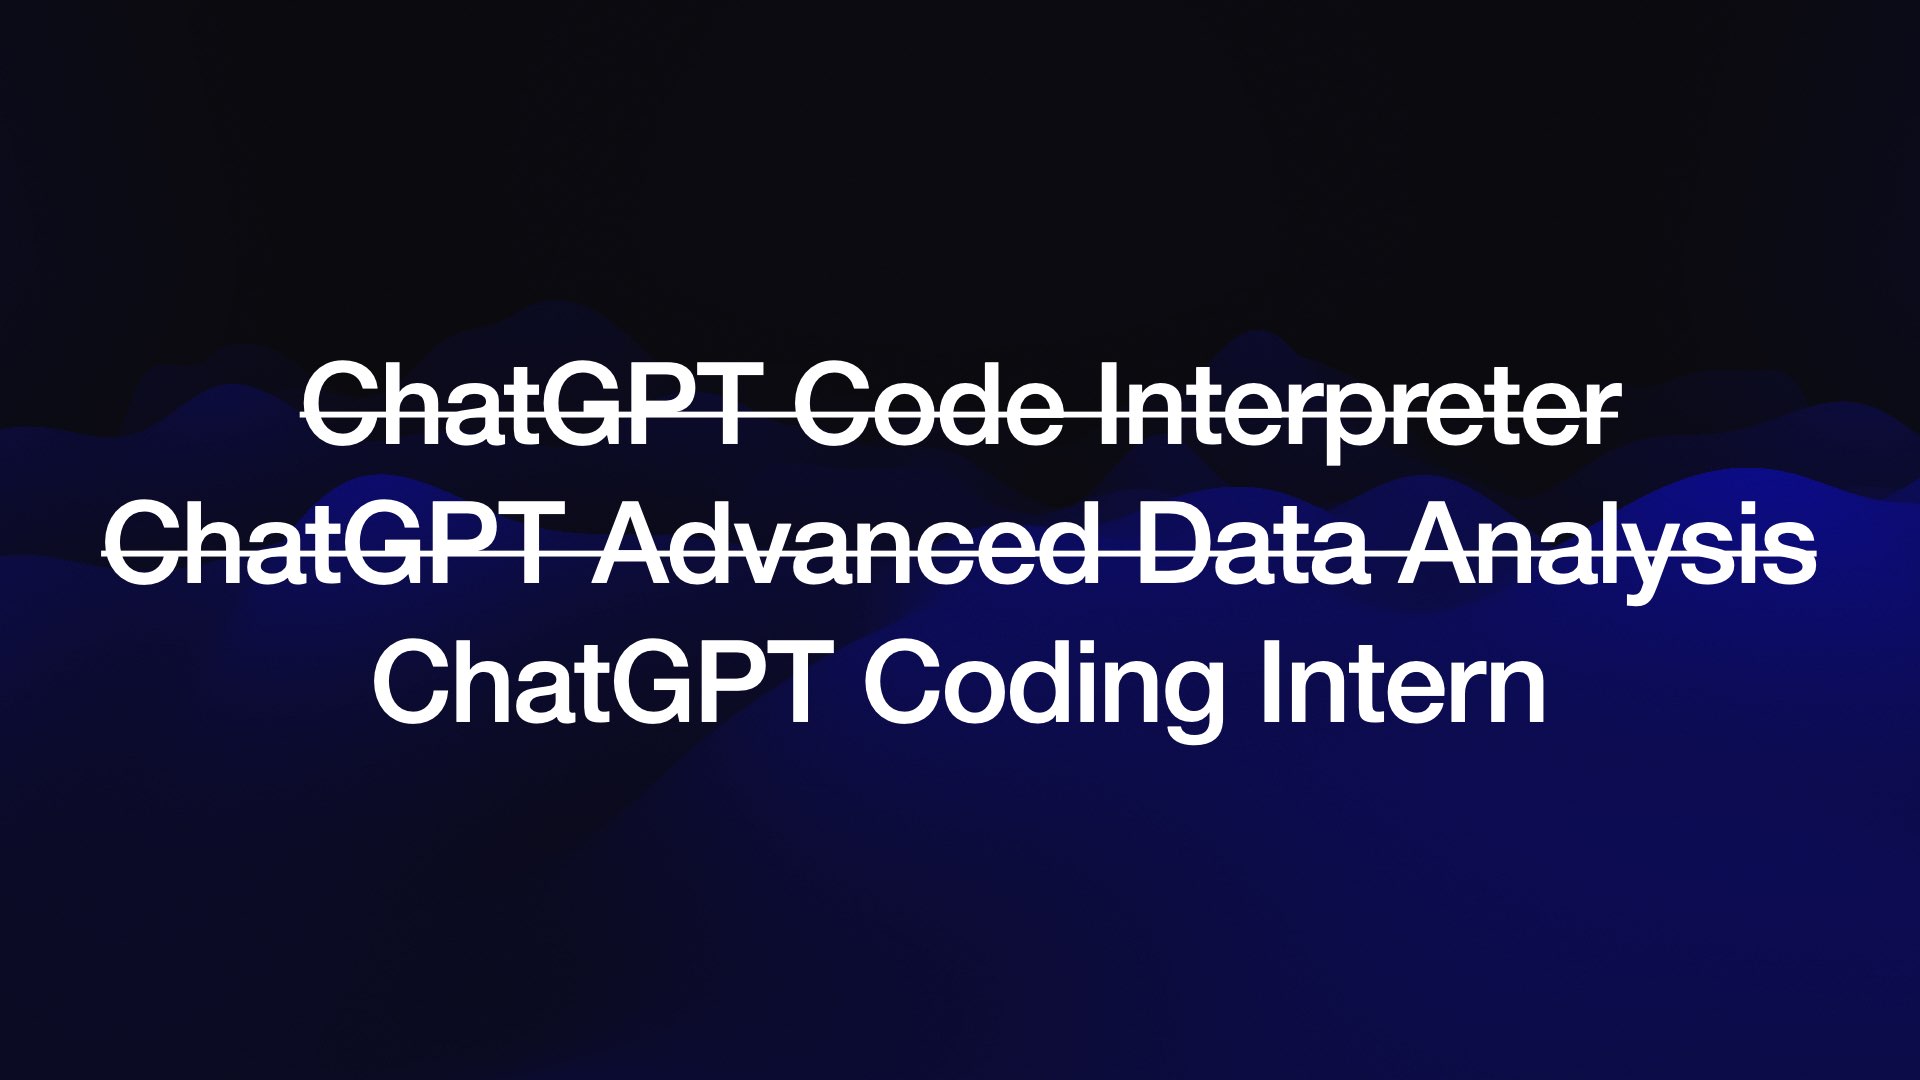 Crossed out: ChatGPT Code Interpreter ChatGPT Coding Intern